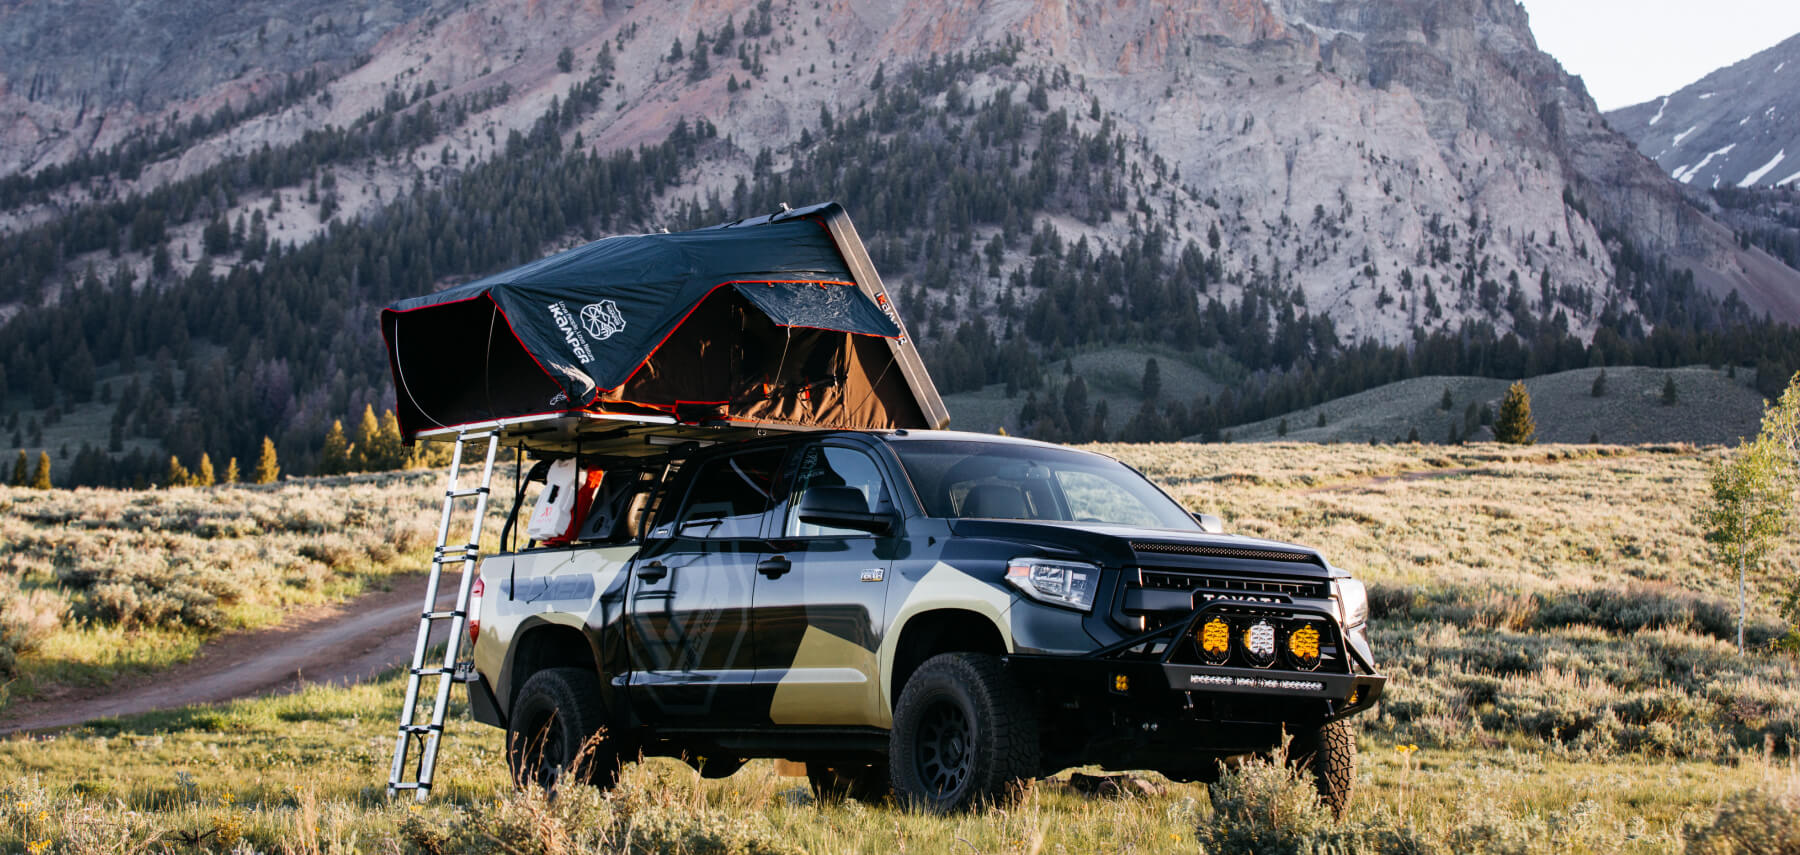 Truck in the mountains with a pickup truck tent open for camping